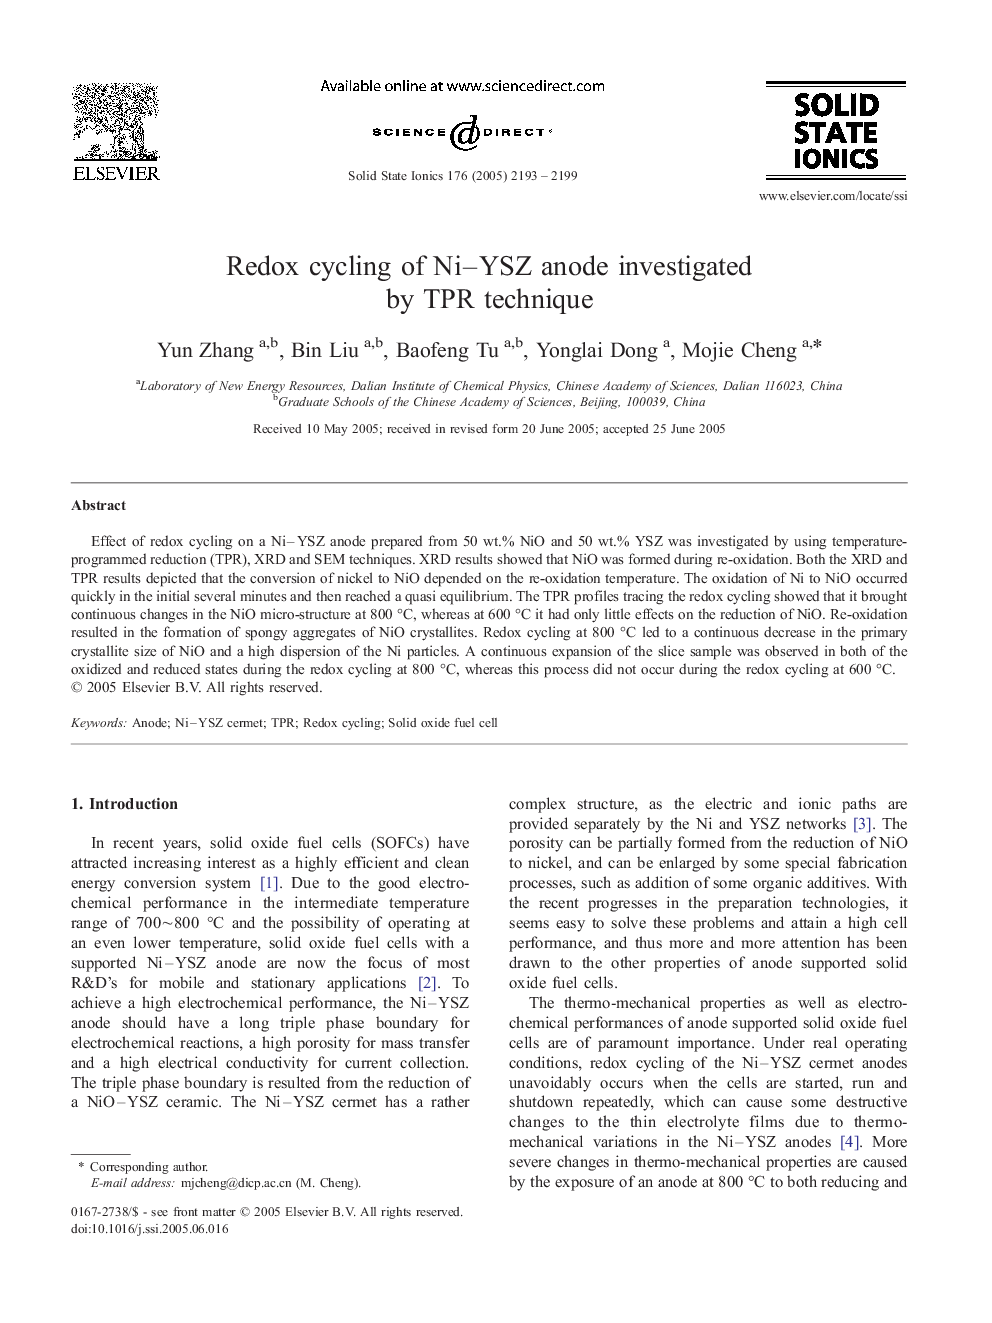 Redox cycling of Ni–YSZ anode investigated by TPR technique